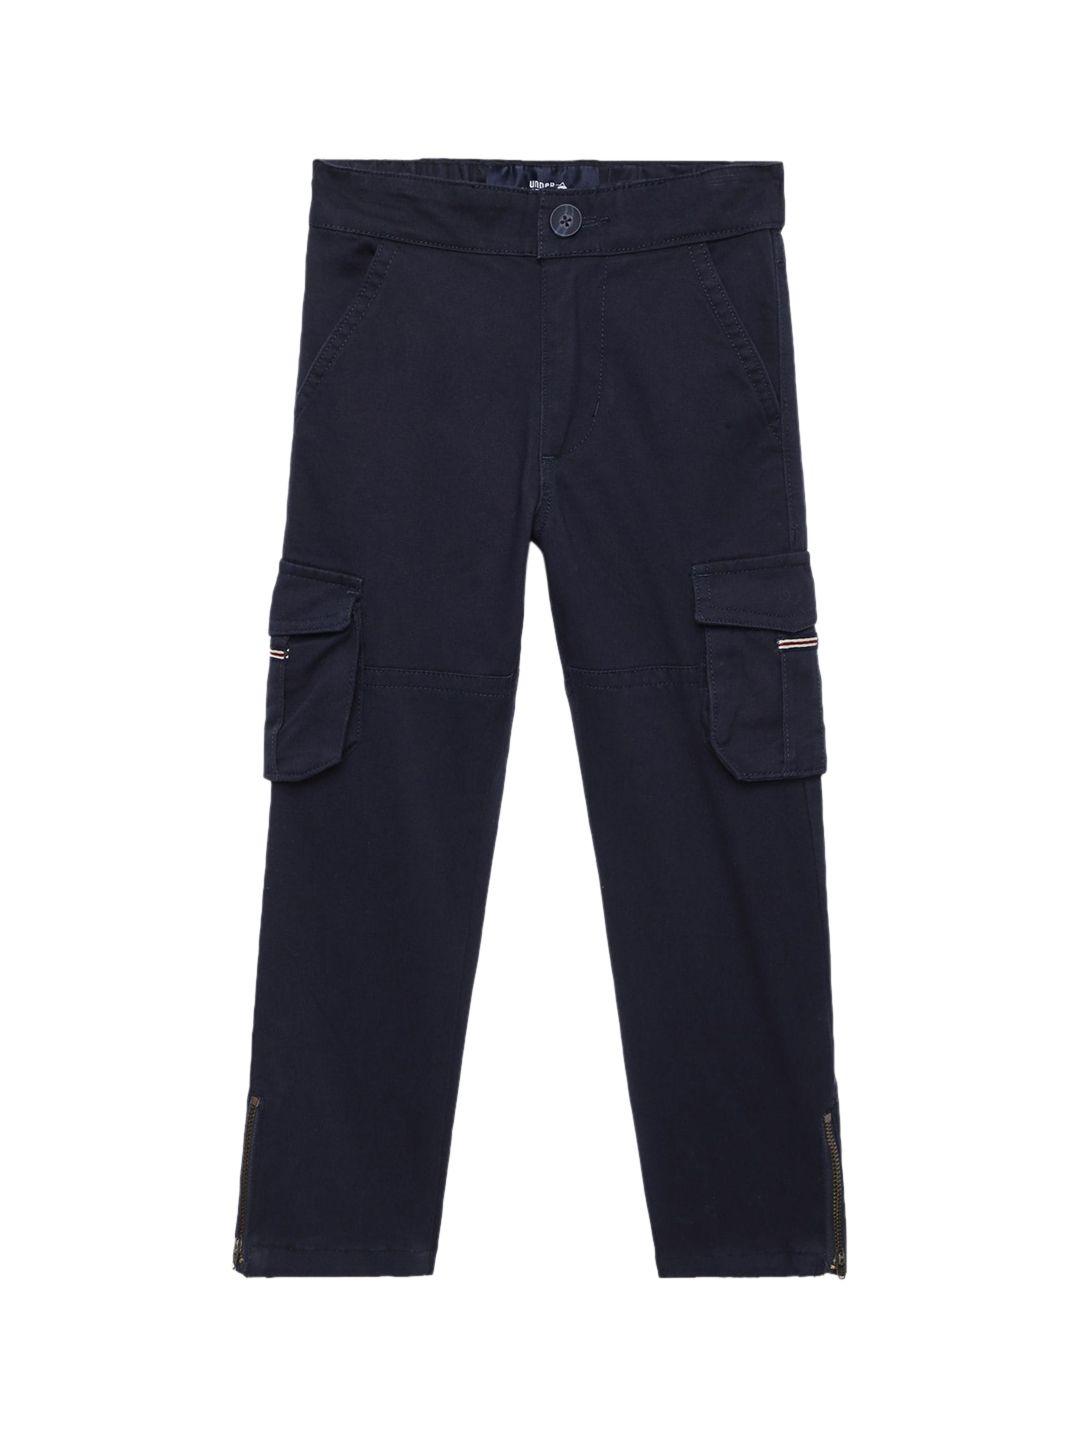 under fourteen only boys navy blue slim fit cargos trousers